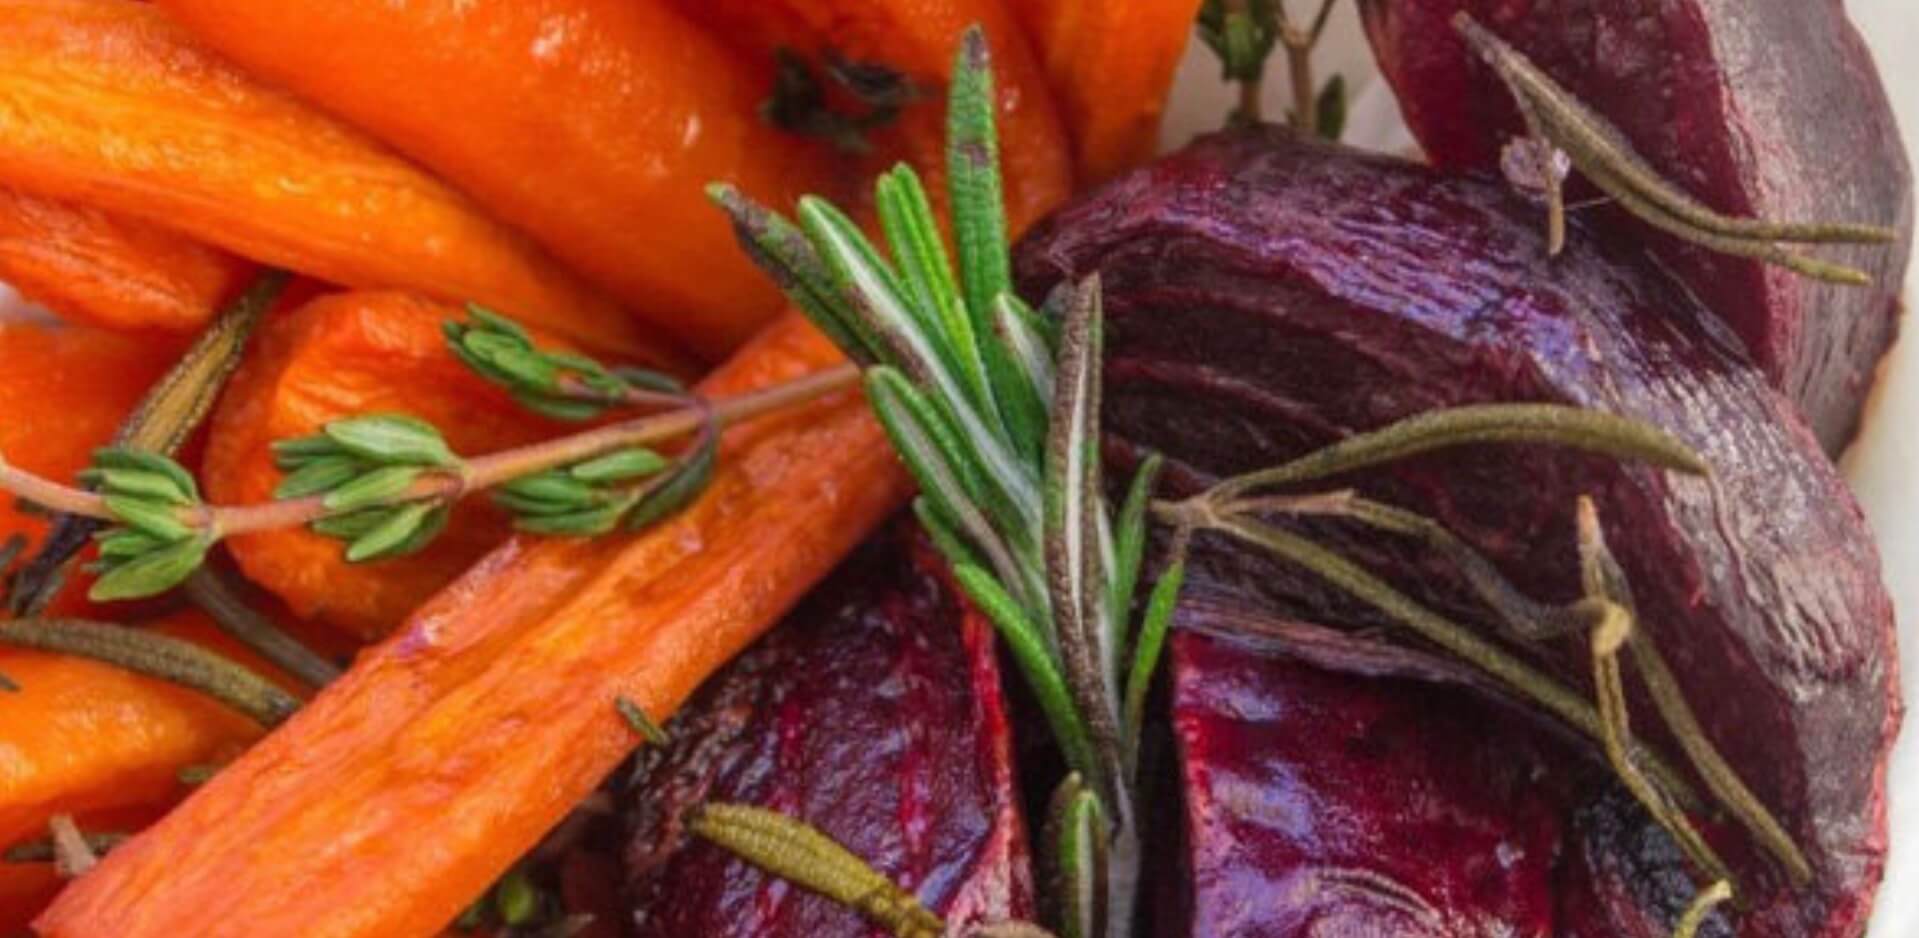 Roasted carrots and beets